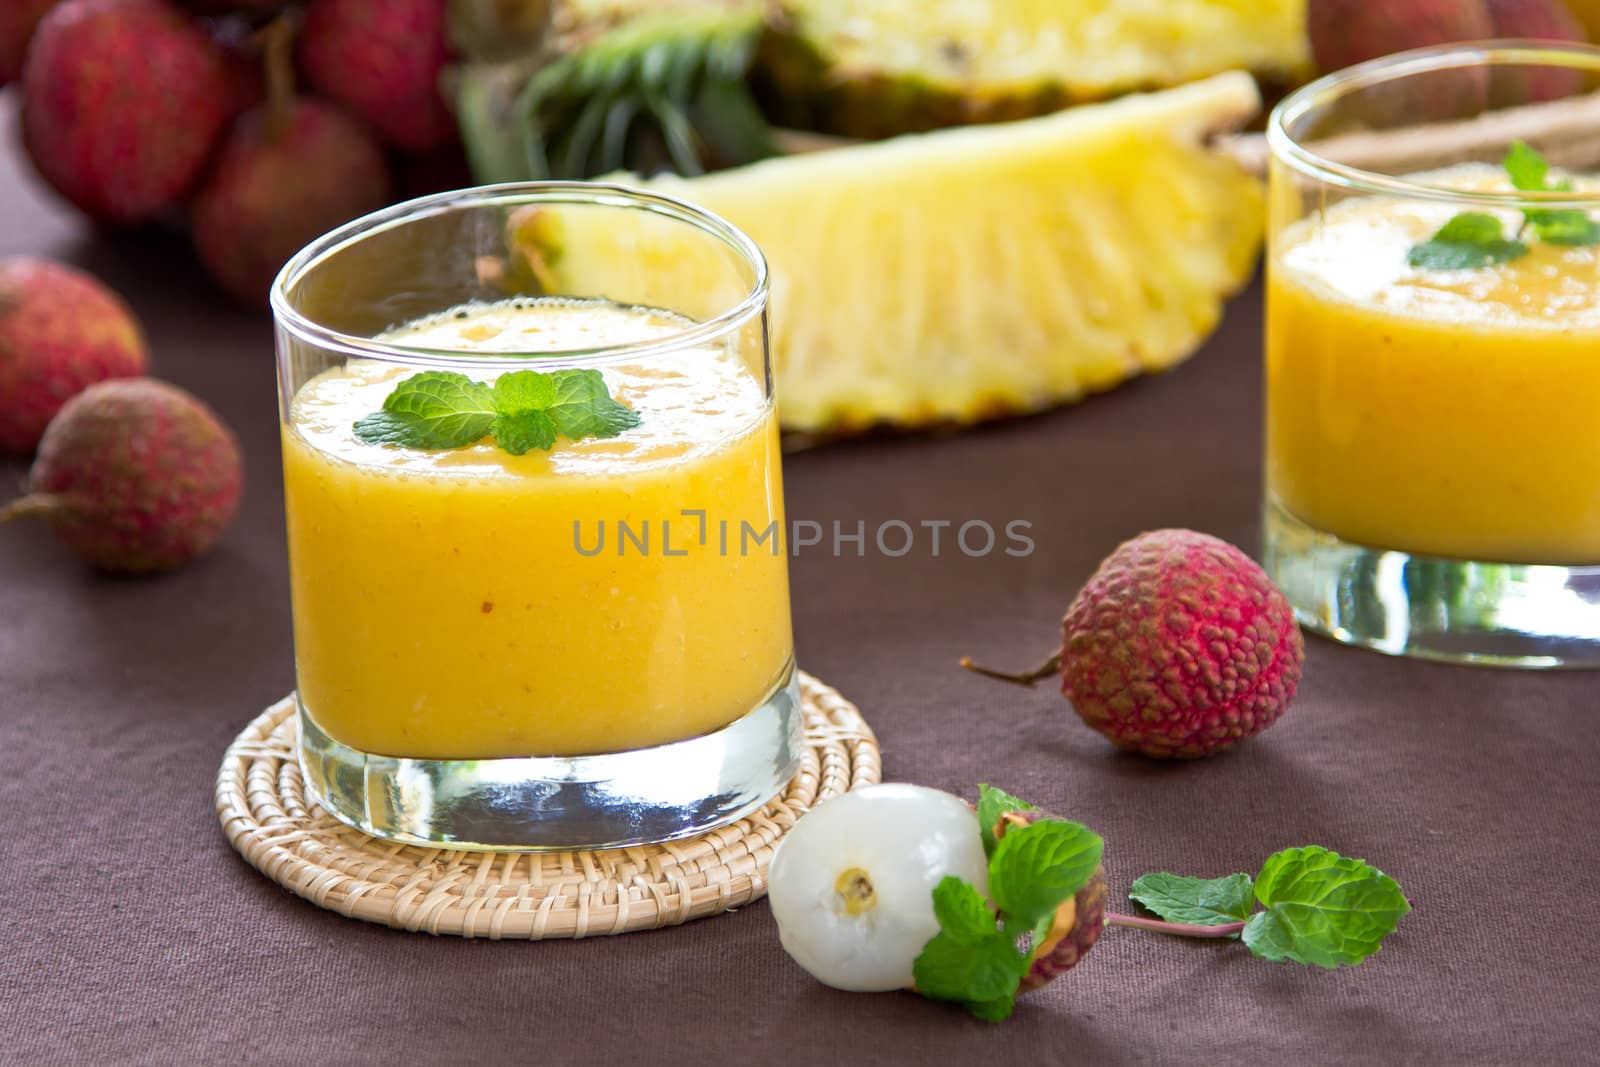 Lychee ,Mango and Pineapple smoothie by vanillaechoes